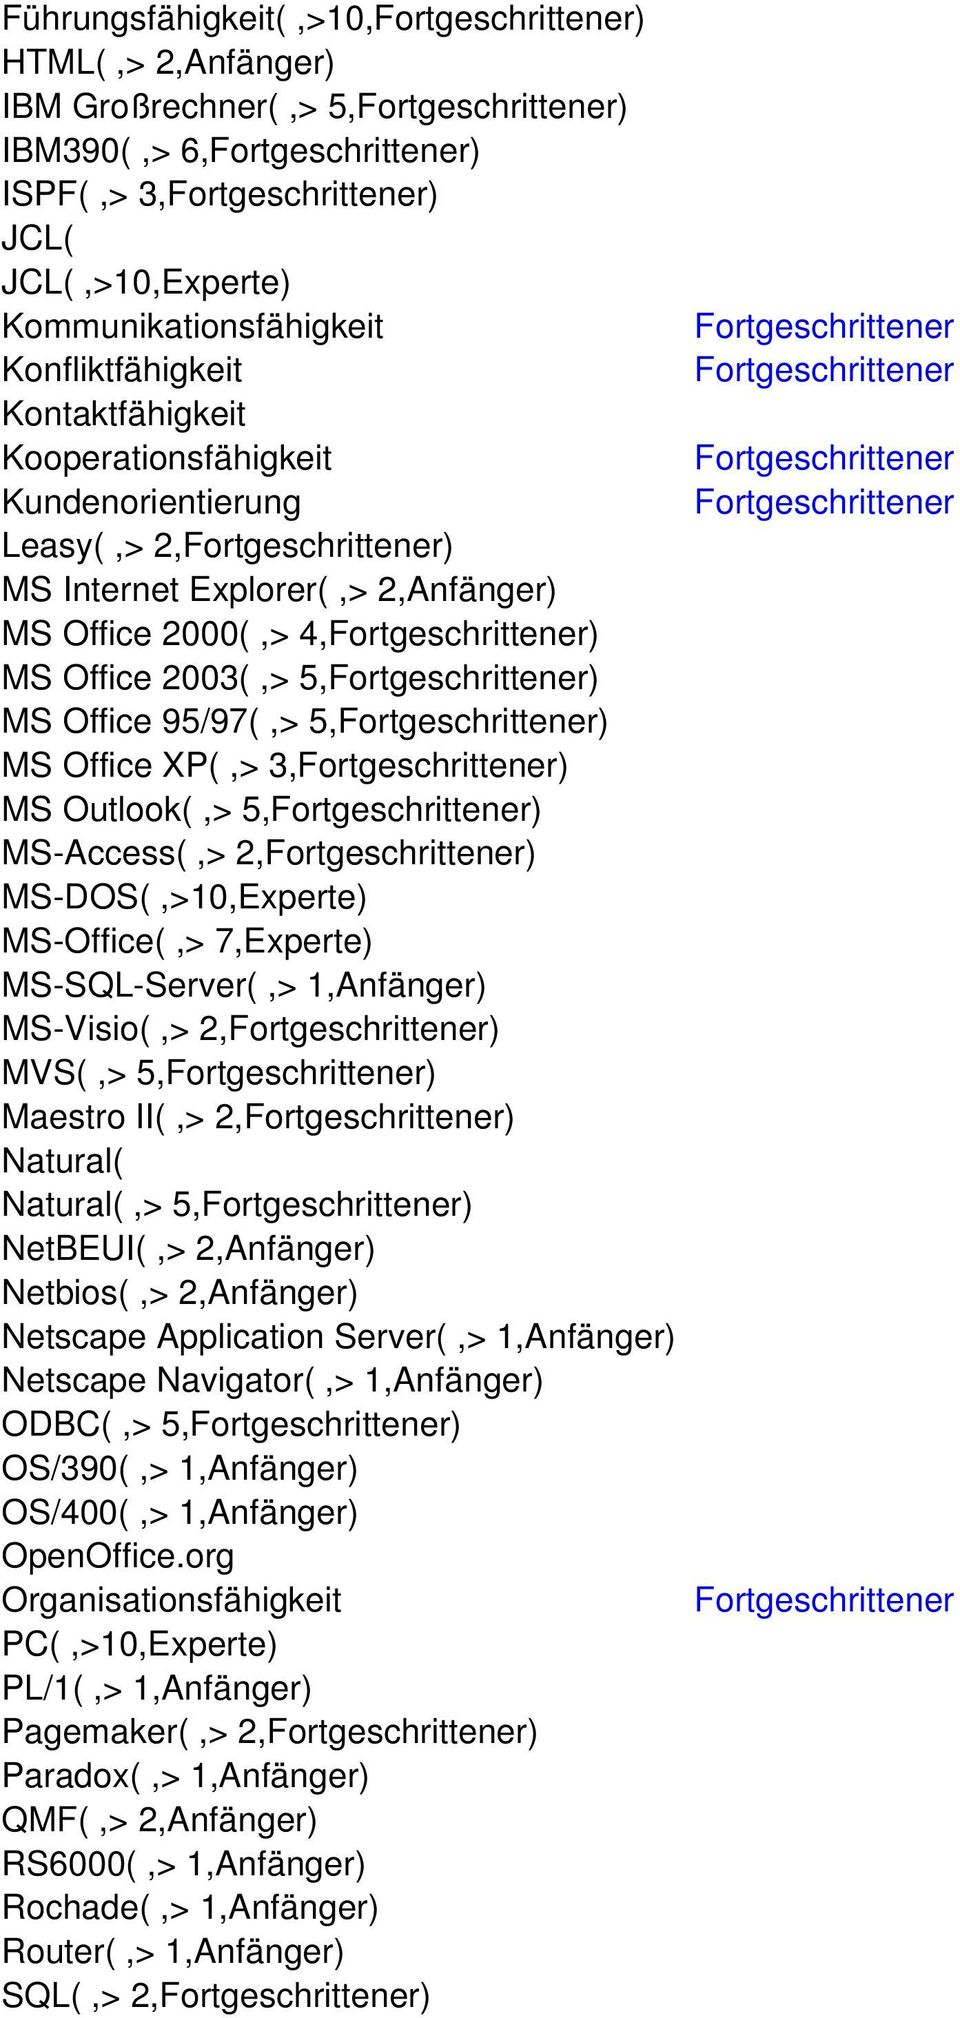 MS-DOS(,>10,Experte) MS-Office(,> 7,Experte) MS-SQL-Server(,> 1,Anfänger) MS-Visio(,> 2,) MVS(,> 5,) Maestro II(,> 2,) Natural( Natural(,> 5,) NetBEUI(,> 2,Anfänger) Netbios(,> 2,Anfänger) Netscape